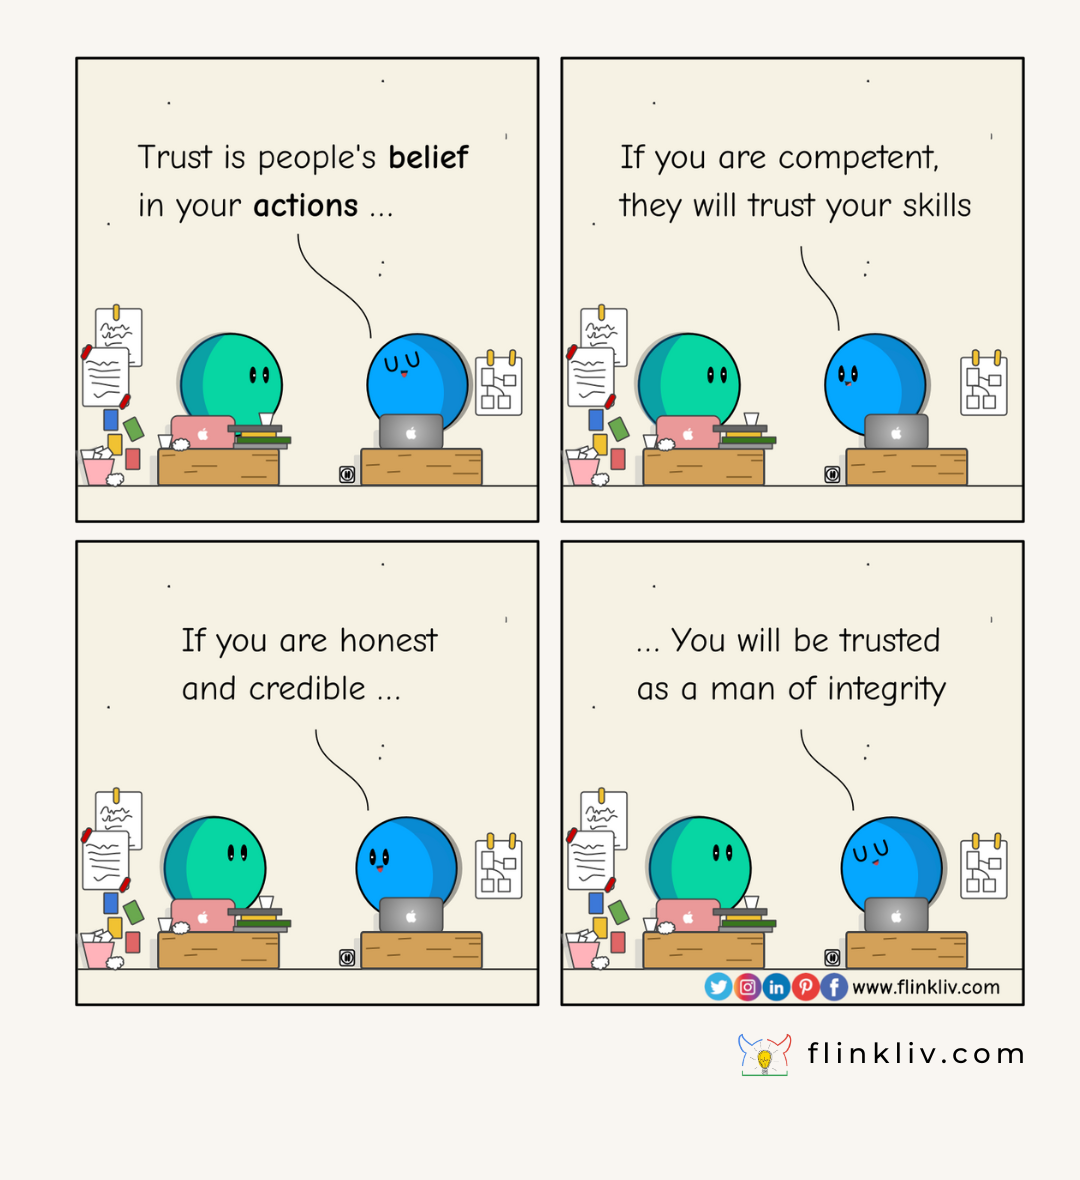 Converaation between A and B about how to earn trust at work with reverse thinking B: Trust is people's belief in your actions. if you are competent, they will trust your skills. If you are honest and credible, you will be trusted as a man of integrity. By Flinkliv.com